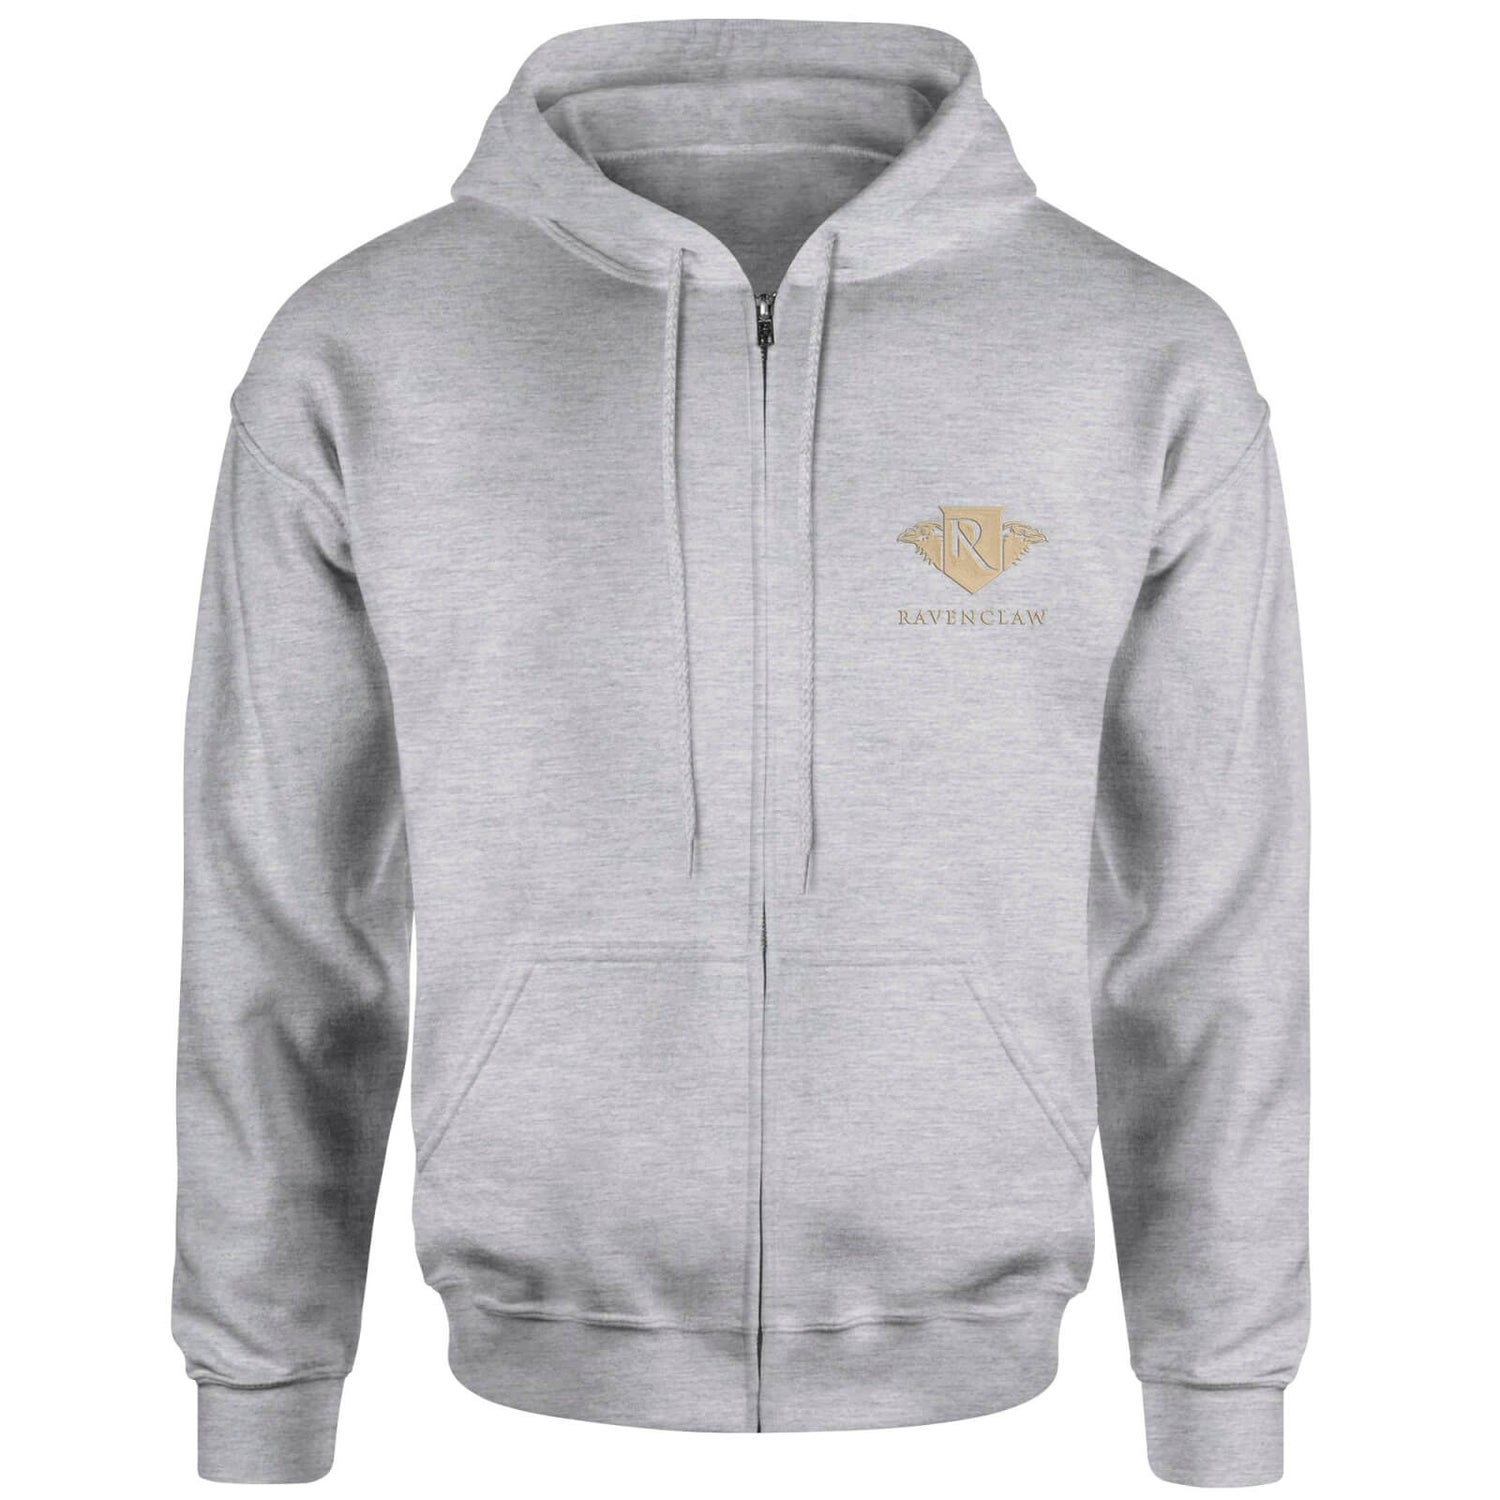 Harry Potter Ravenclaw Embroidered Unisex Zipped Hoodie - Grey